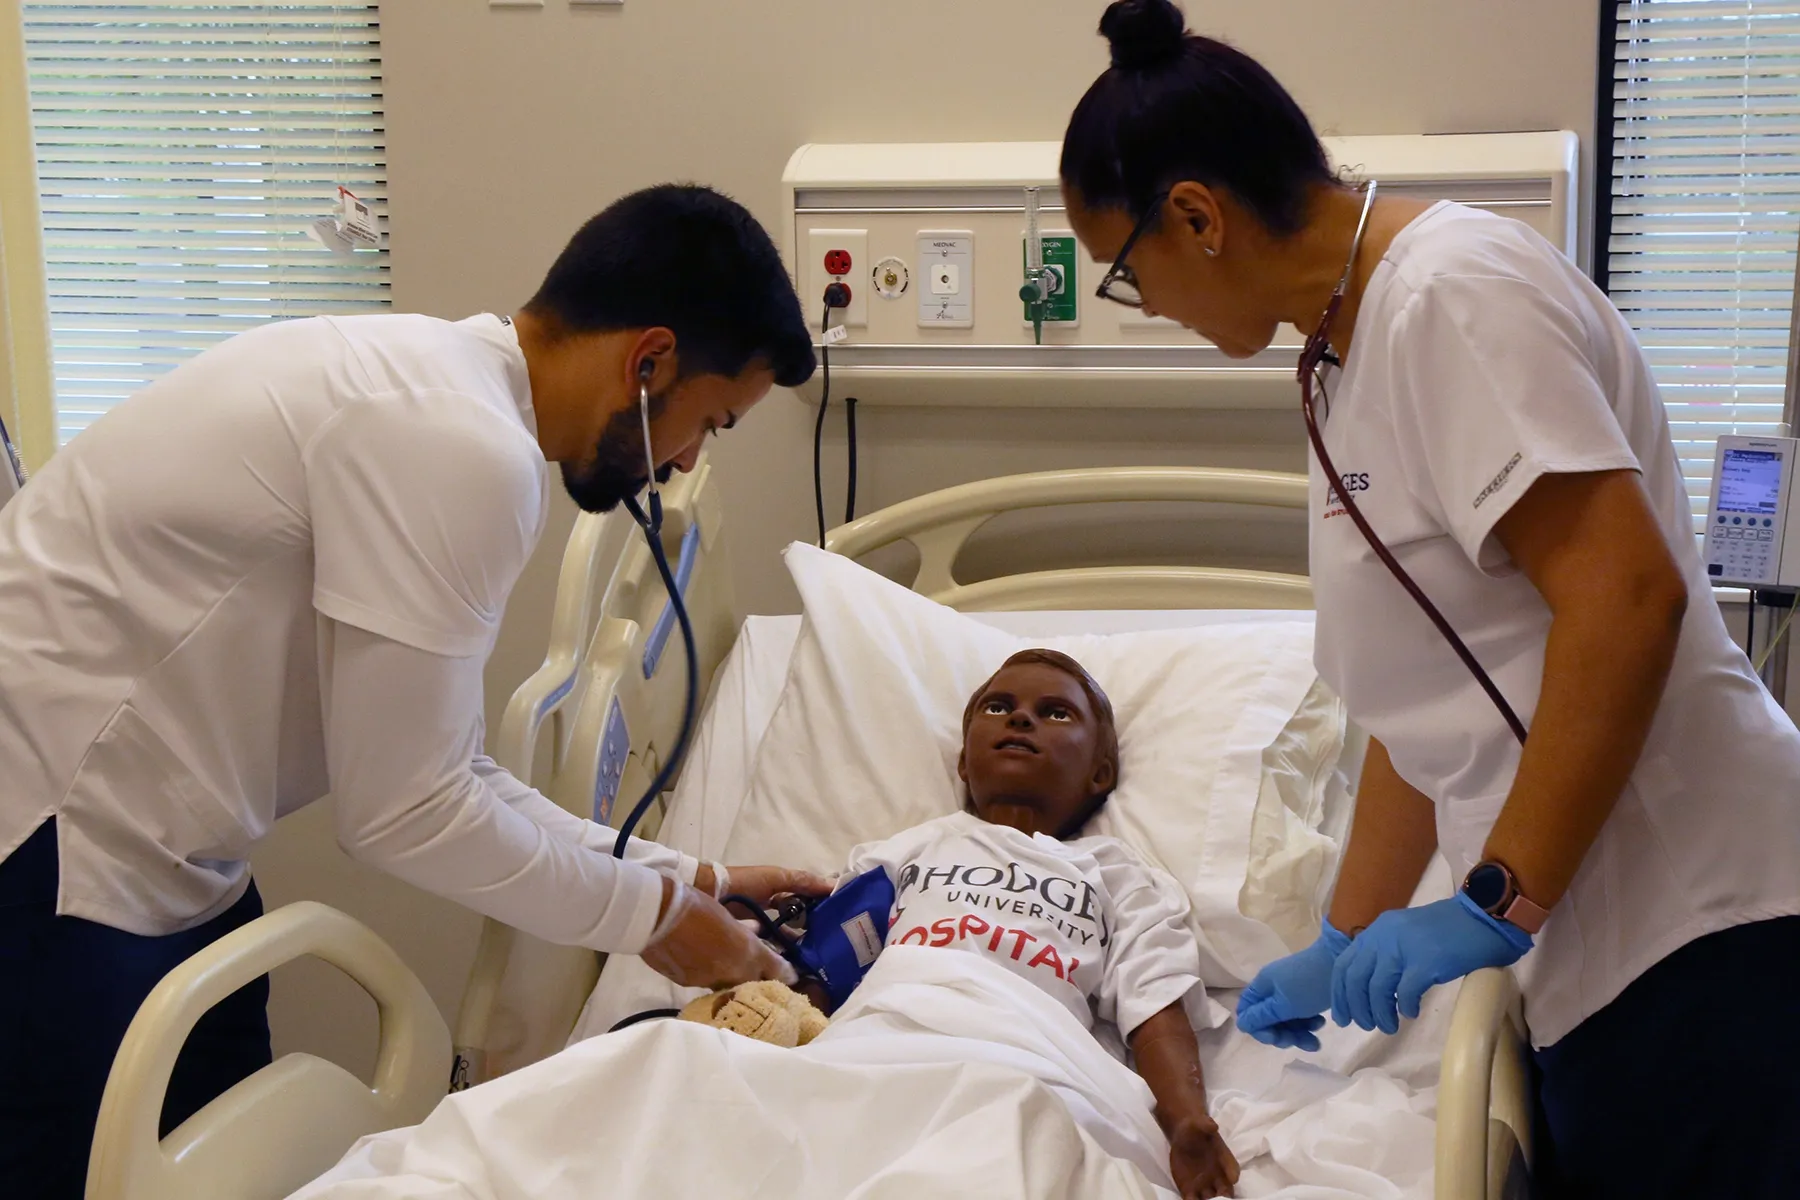 Hodges University students taking part in a simulation exercise in the state-of-the-art nursing lab